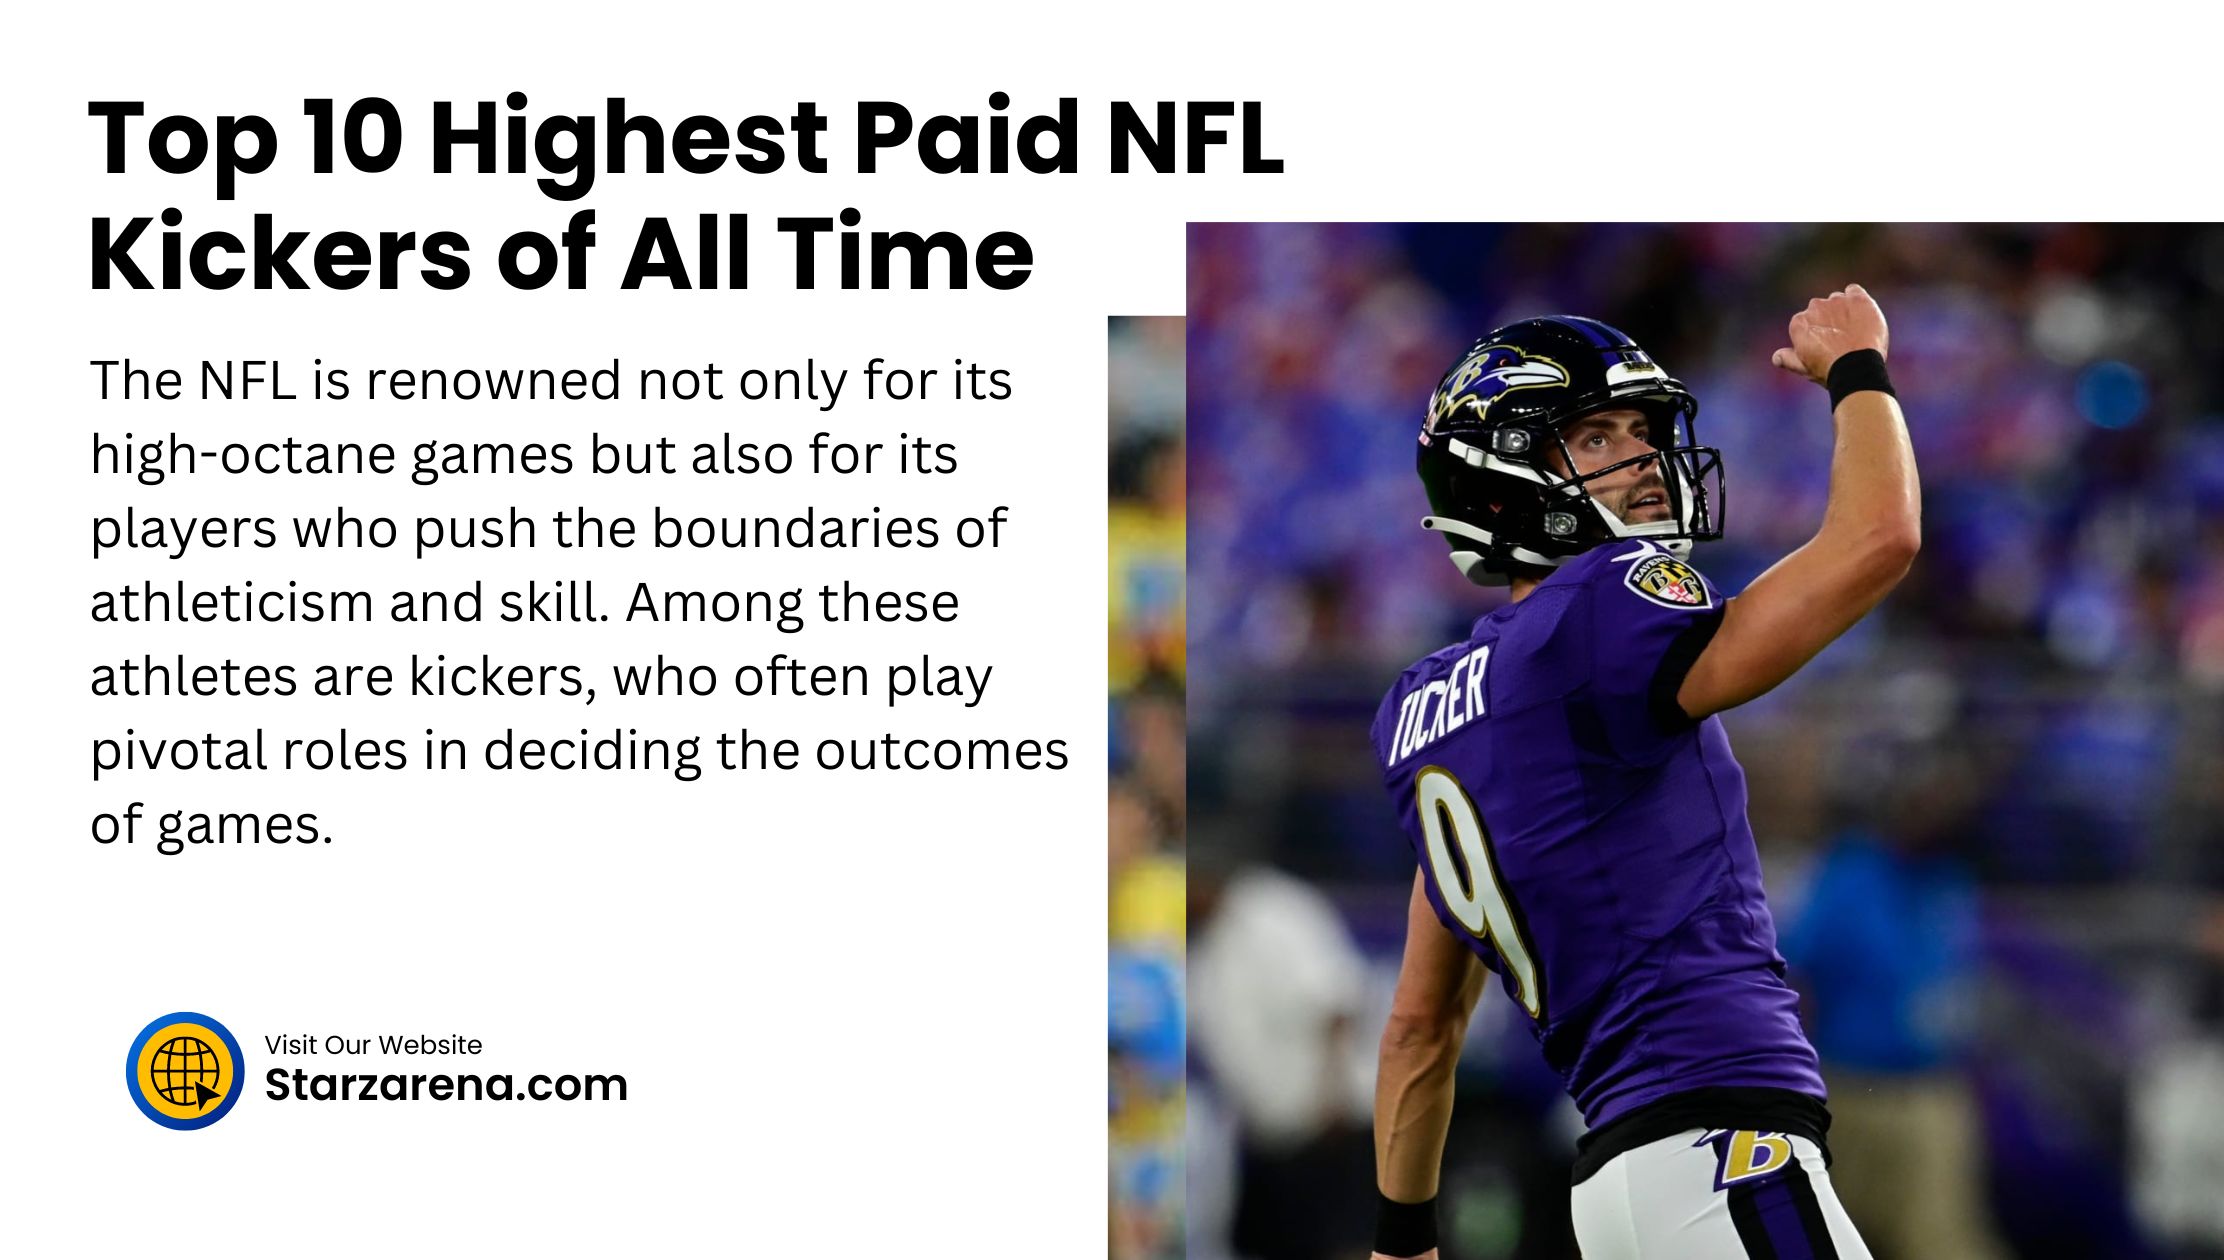 Top 10 Highest Paid NFL Kickers of All Time